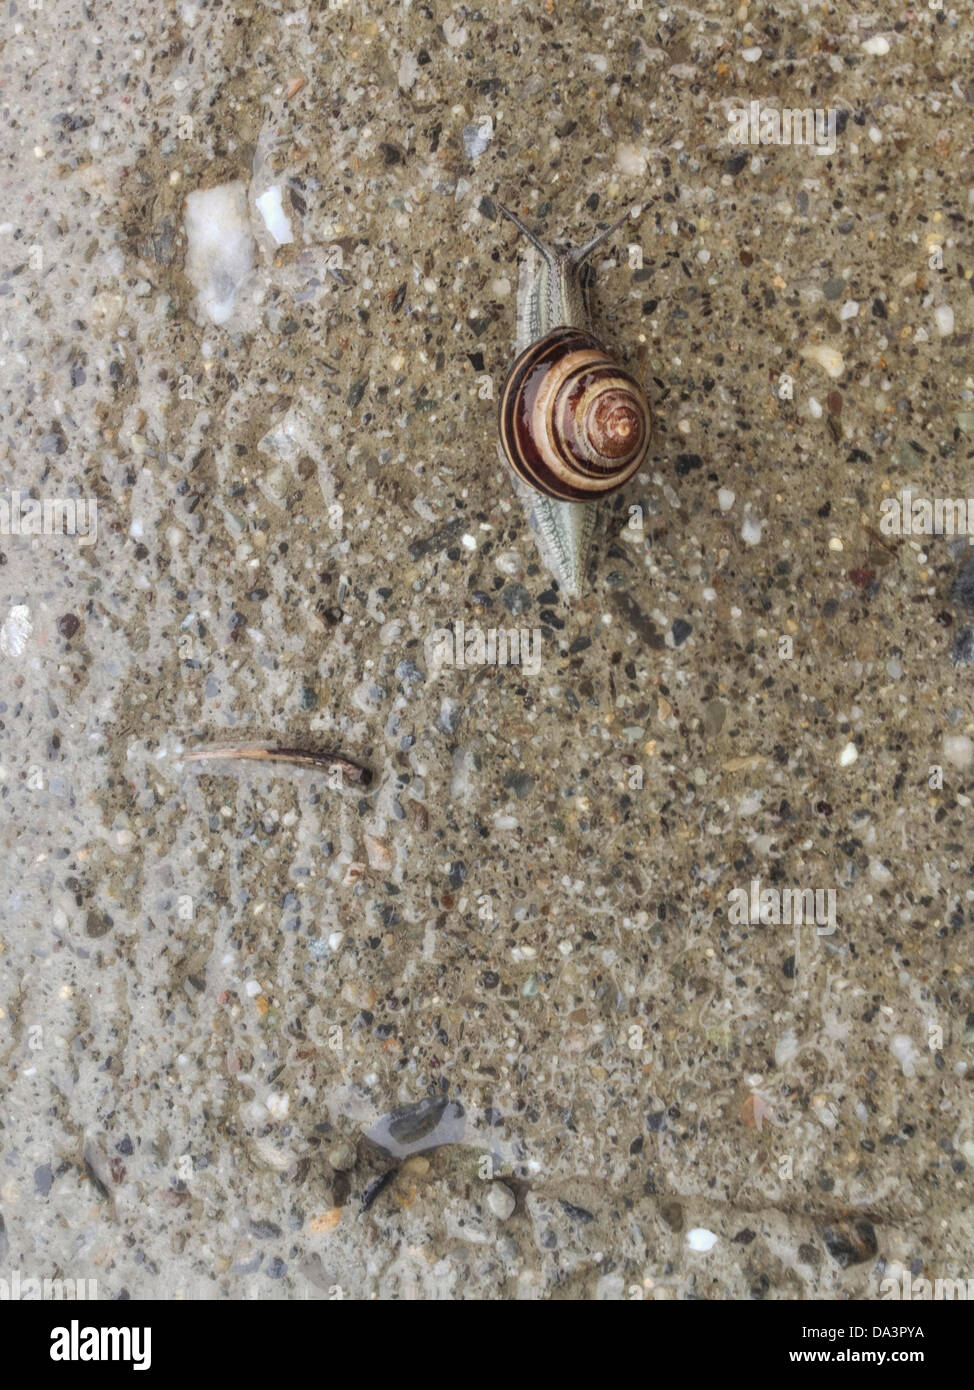 New York, USA. 2nd July 2013. 2 July 2013: With continued rainy weather in the forcast, torrential downpours and flash flood warnings in the New York tristate area, it is the perfect weather for snails.  Here, showing up on a suburban sidewalk in Mt. Kisco, New York. Cepaea nemoralis common names Brown-lipped snail, Larger banded snail, Banded wood snail, Grove snail. iPhone photo. Credit:  Marianne A. Campolongo/Alamy Live News Stock Photo